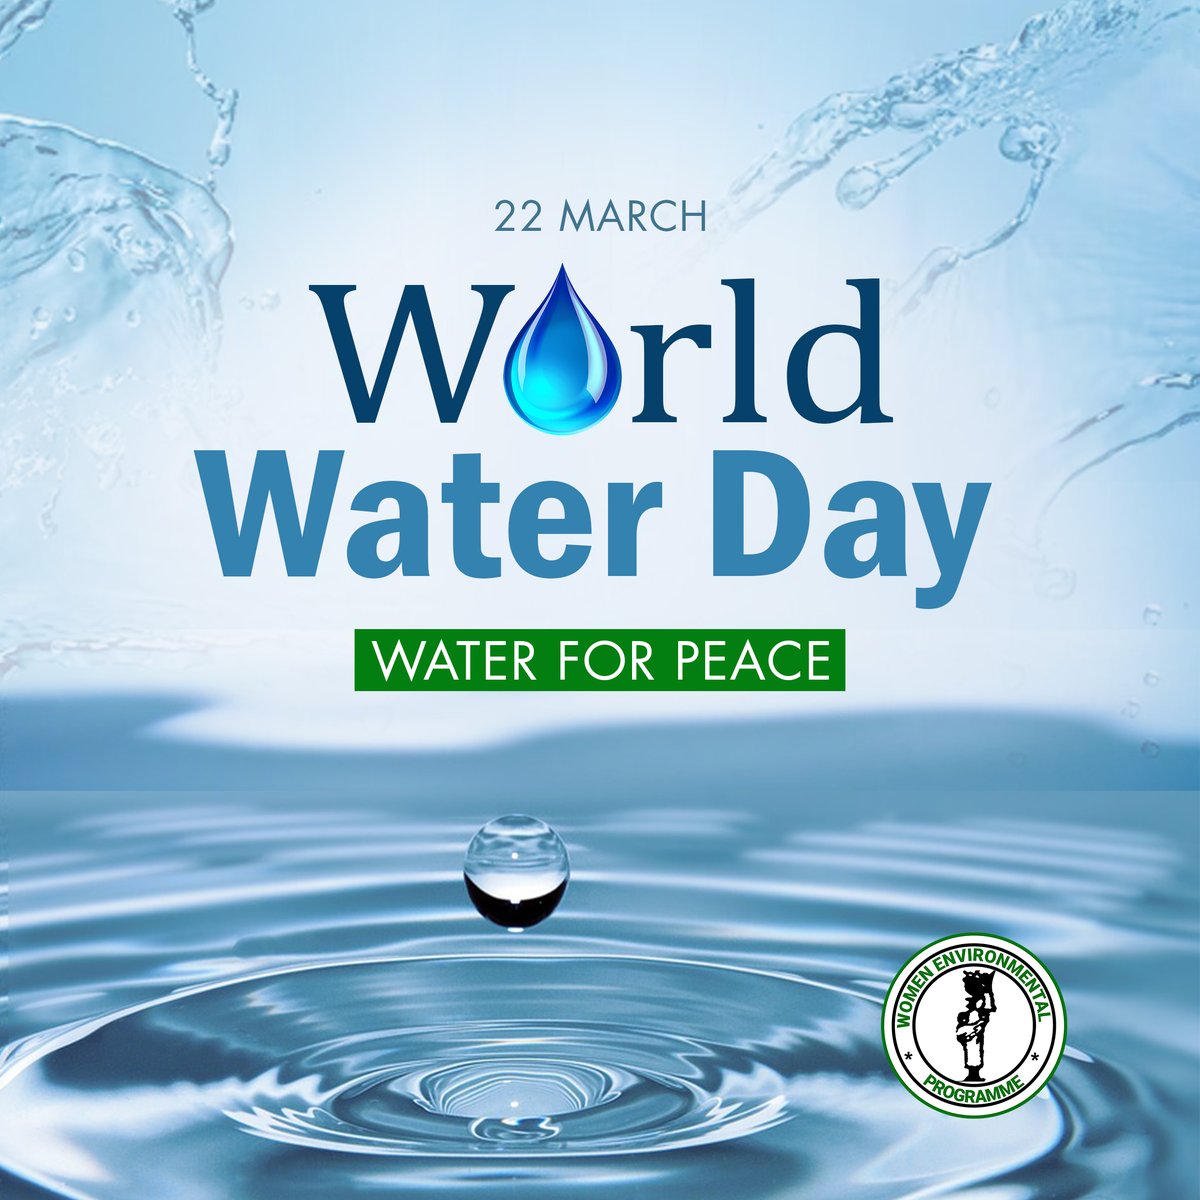 💧🌍 When we cooperate on water, we create a positive ripple effect – fostering harmony and building resilience to shared challenges. This #WorldWaterDay , Let's unite around water and use water for peace, laying the foundations of a more stable and prosperous tomorrow.